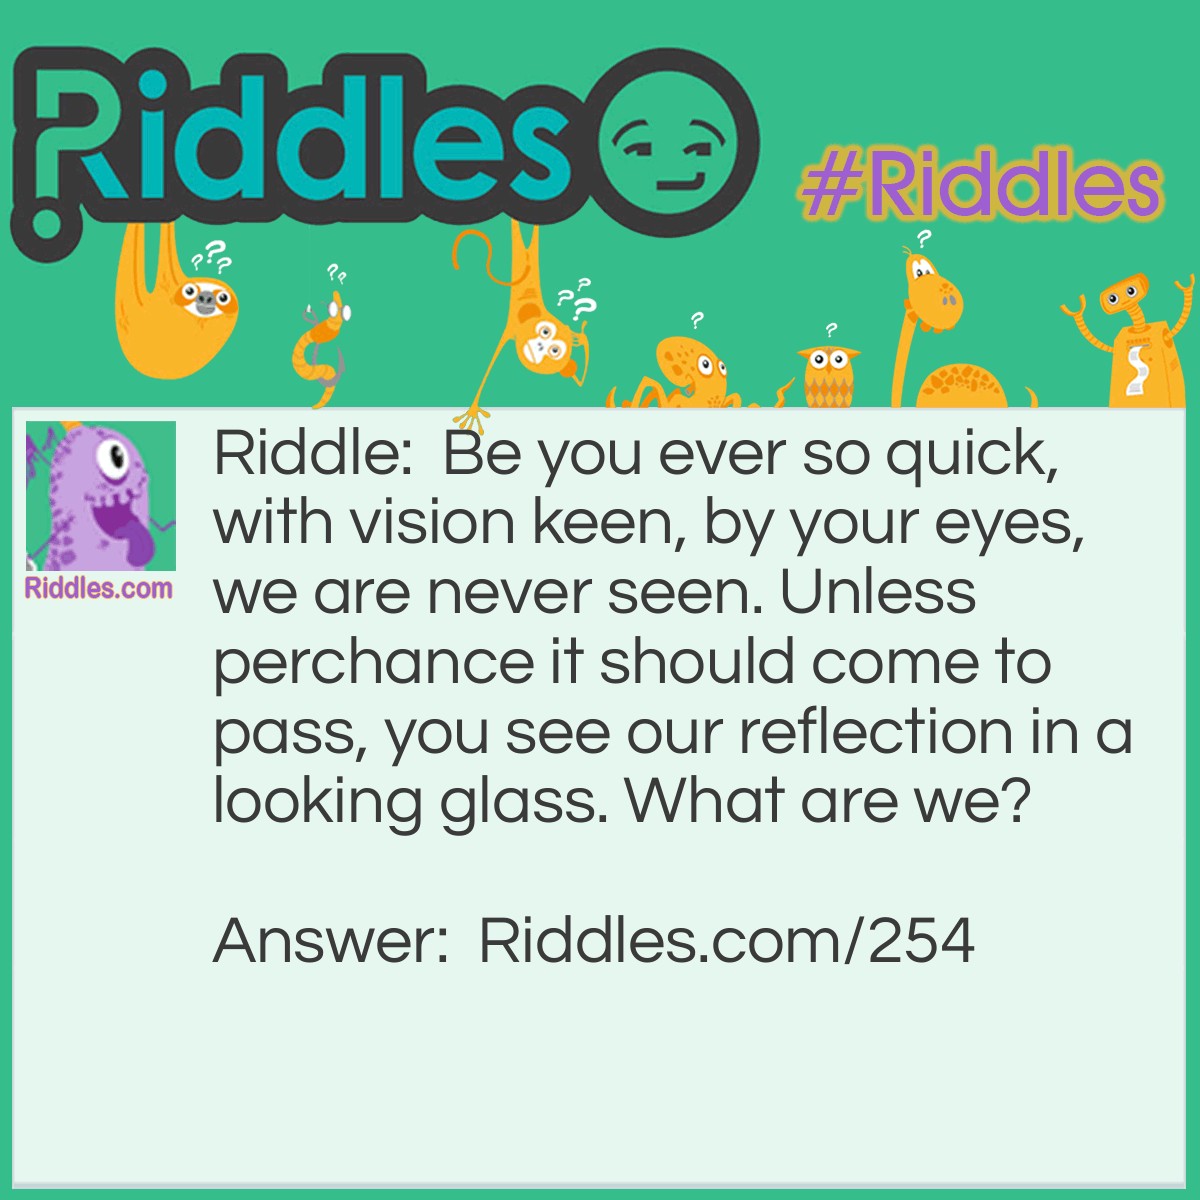 Riddle: Be you ever so quick, with vision keen, by your eyes, we are never seen. Unless perchance it should come to pass, you see our reflection in a looking glass. What are we? Answer: Your own eyes.